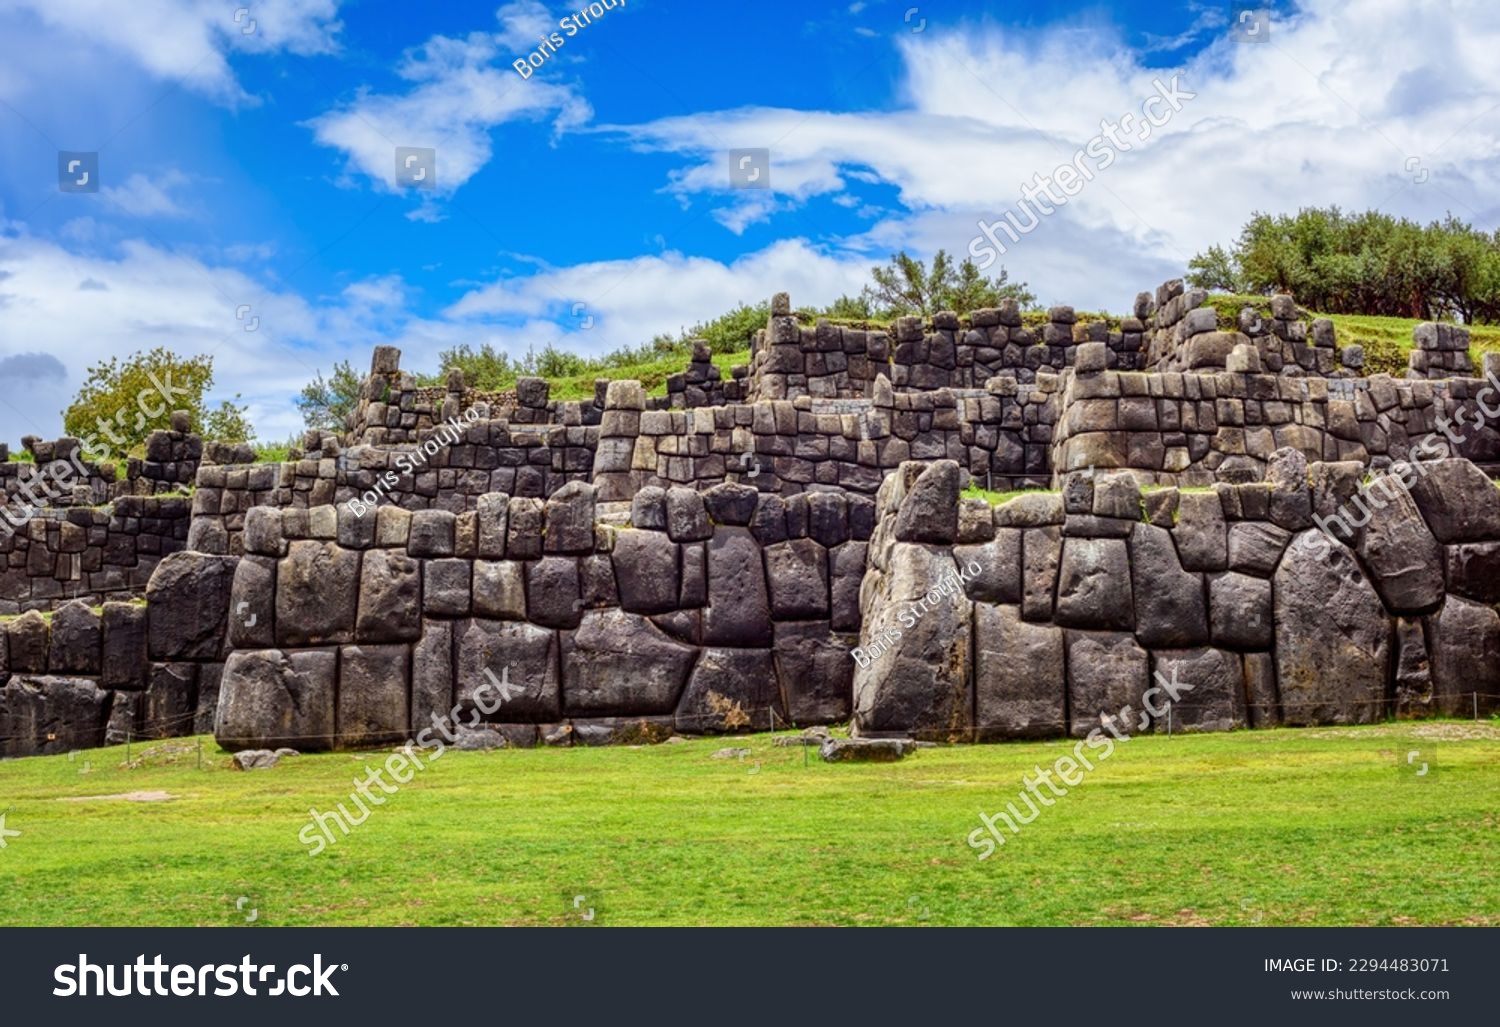 The historic stone walls of the Inca Sacsayhuaman citadel in Cusco town, Peru, a famous UNESCO World Culture Heritage site and a popular travel destination in Peru #2294483071